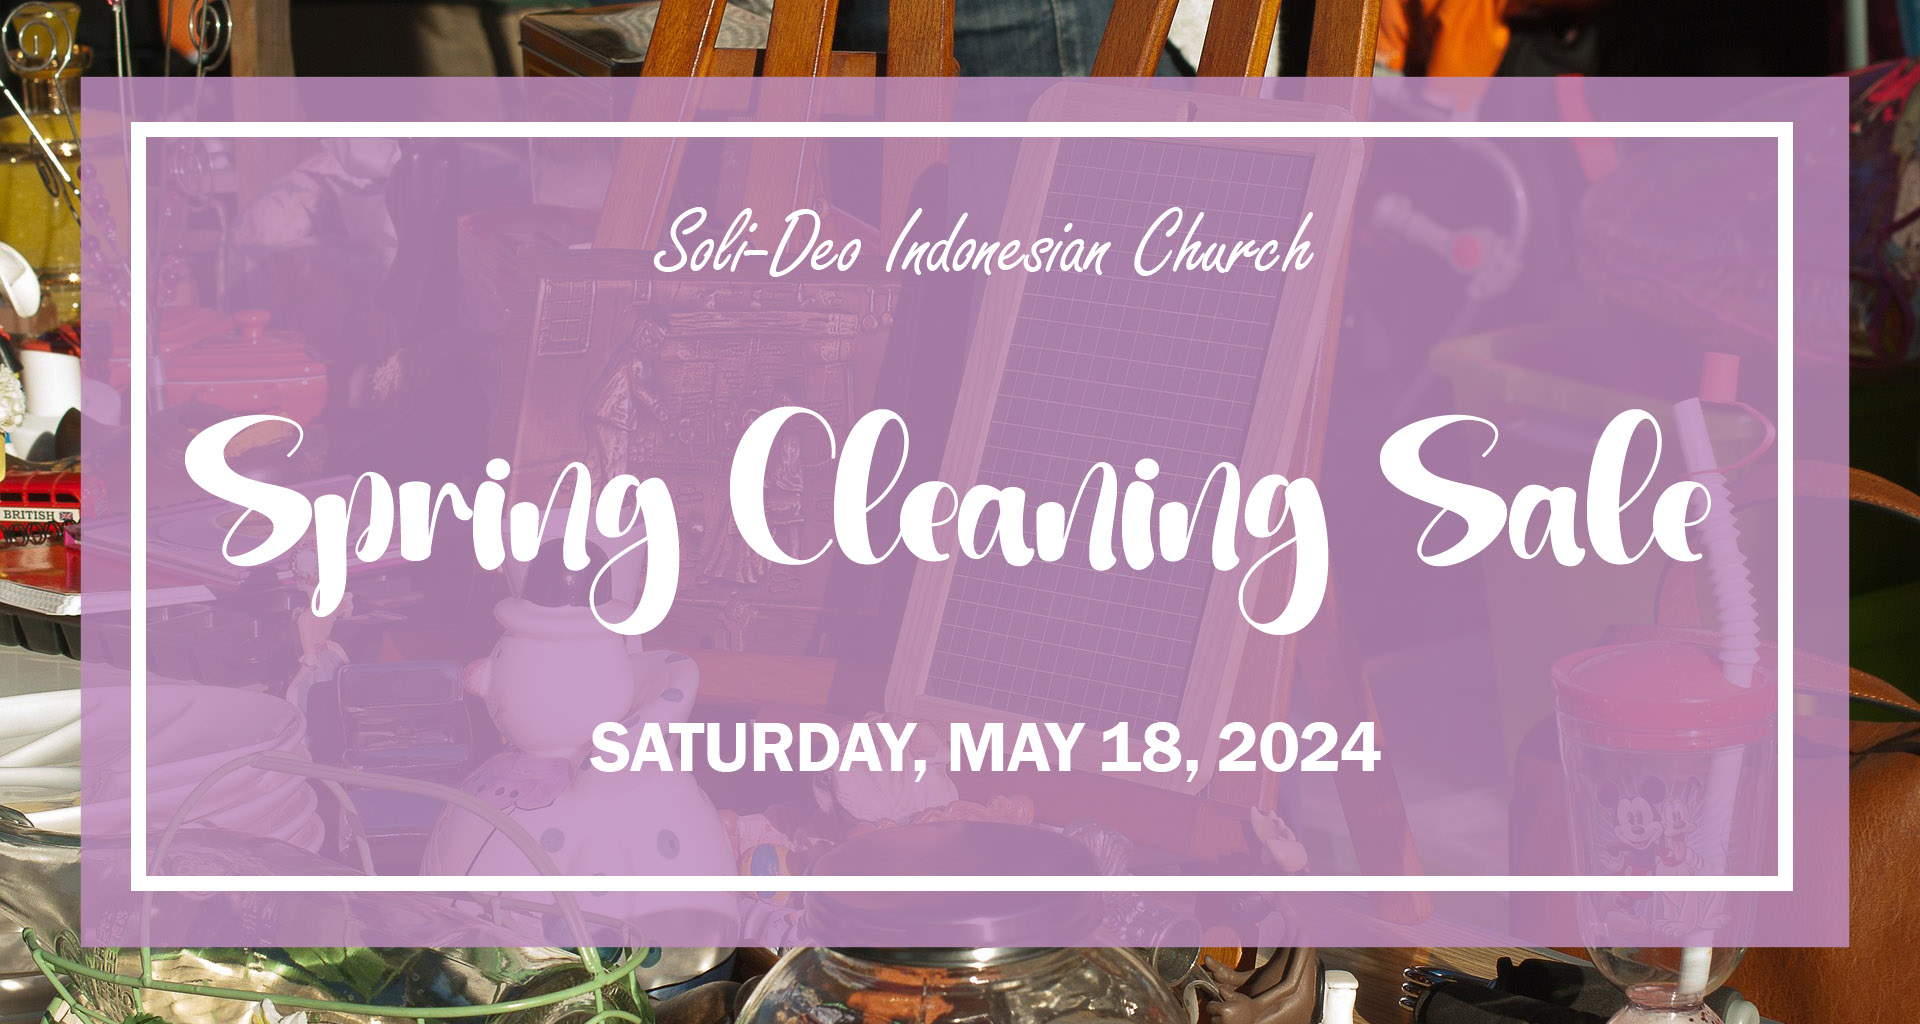 Spring Cleaning Sale